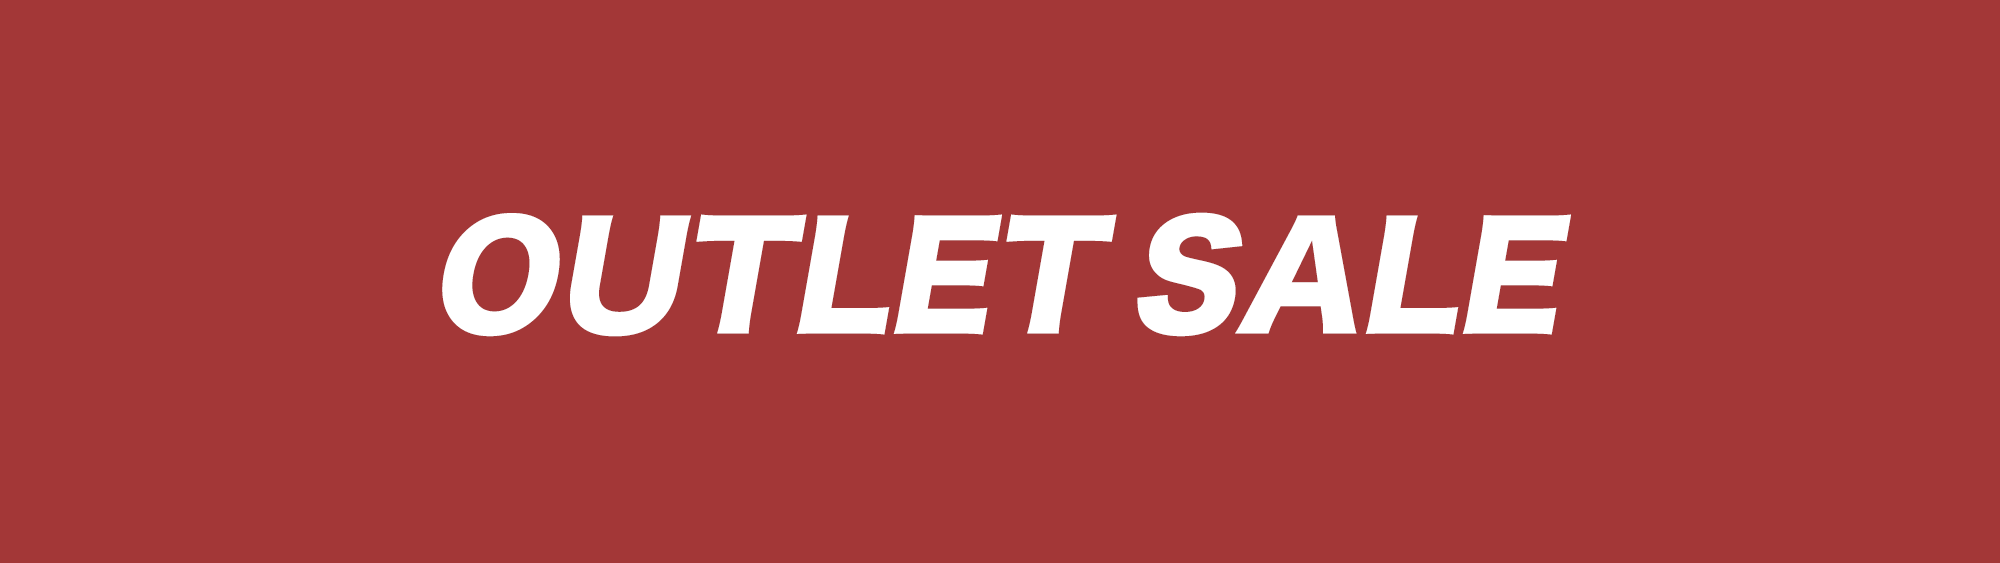 OUTLET SALE-WOMENS